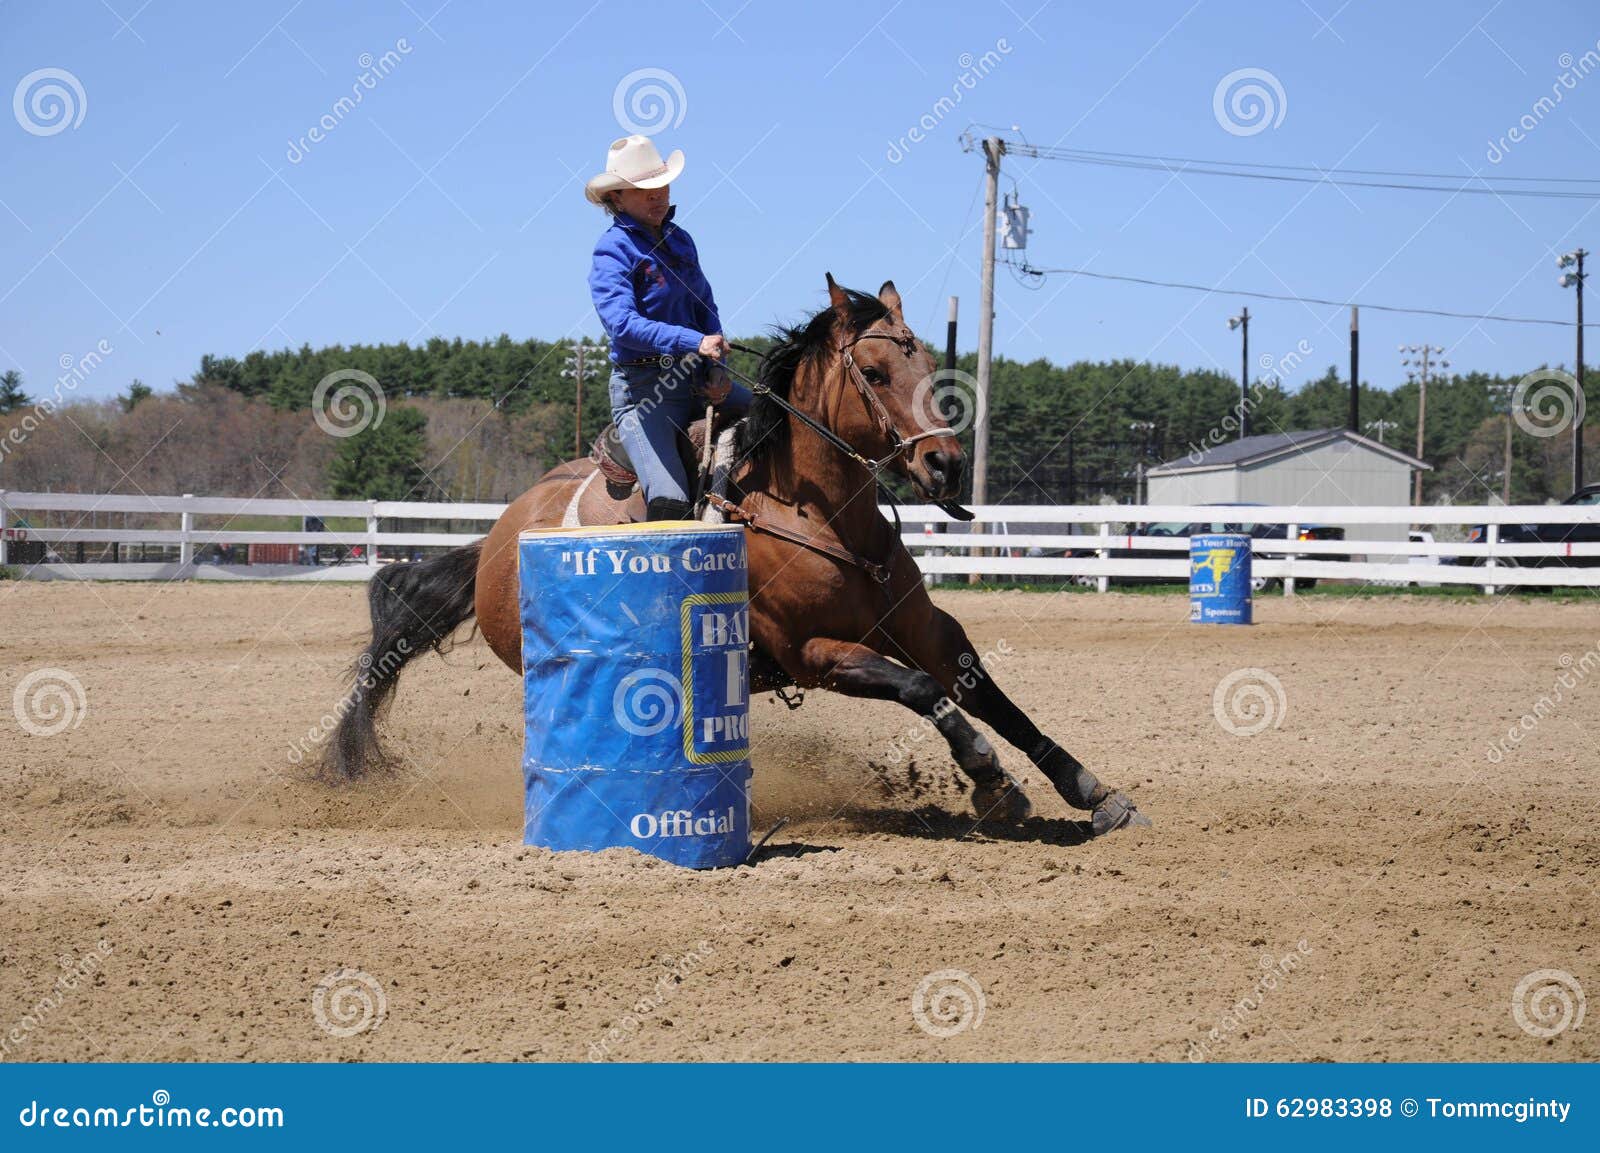 Woman Barrel Racing On Her Beautiful Horse In A Rodeo Arena Stock Photo -  Download Image Now - iStock